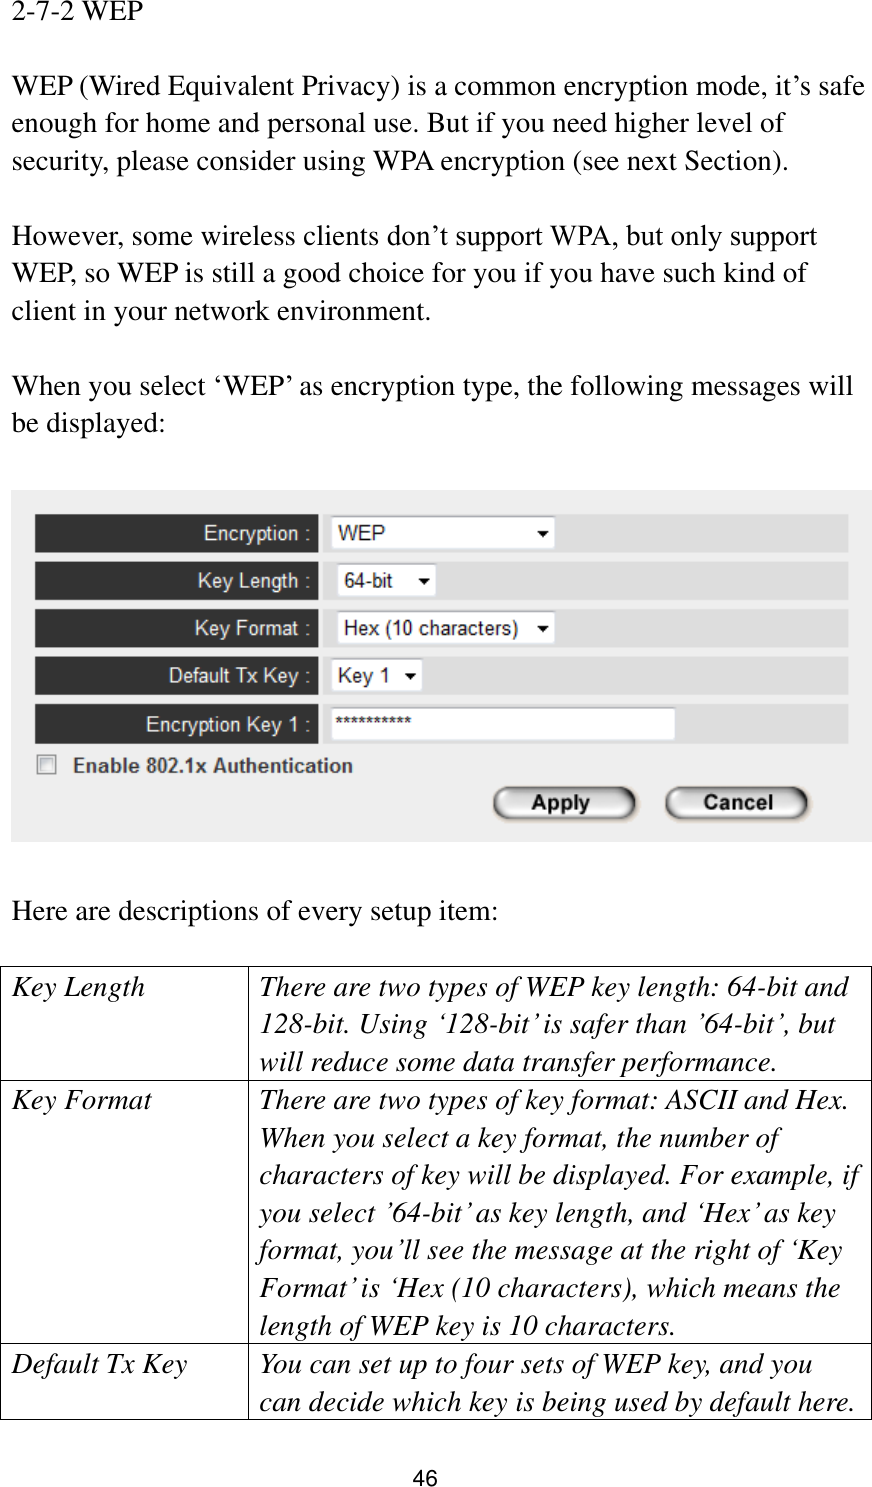 46 2-7-2 WEP  WEP (Wired Equivalent Privacy) is a common encryption mode, it‟s safe enough for home and personal use. But if you need higher level of security, please consider using WPA encryption (see next Section).    However, some wireless clients don‟t support WPA, but only support WEP, so WEP is still a good choice for you if you have such kind of client in your network environment.  When you select „WEP‟ as encryption type, the following messages will be displayed:    Here are descriptions of every setup item:  Key Length There are two types of WEP key length: 64-bit and 128-bit. Using „128-bit‟ is safer than ‟64-bit‟, but will reduce some data transfer performance. Key Format There are two types of key format: ASCII and Hex. When you select a key format, the number of characters of key will be displayed. For example, if you select ‟64-bit‟ as key length, and „Hex‟ as key format, you‟ll see the message at the right of „Key Format‟ is „Hex (10 characters), which means the length of WEP key is 10 characters. Default Tx Key You can set up to four sets of WEP key, and you can decide which key is being used by default here. 